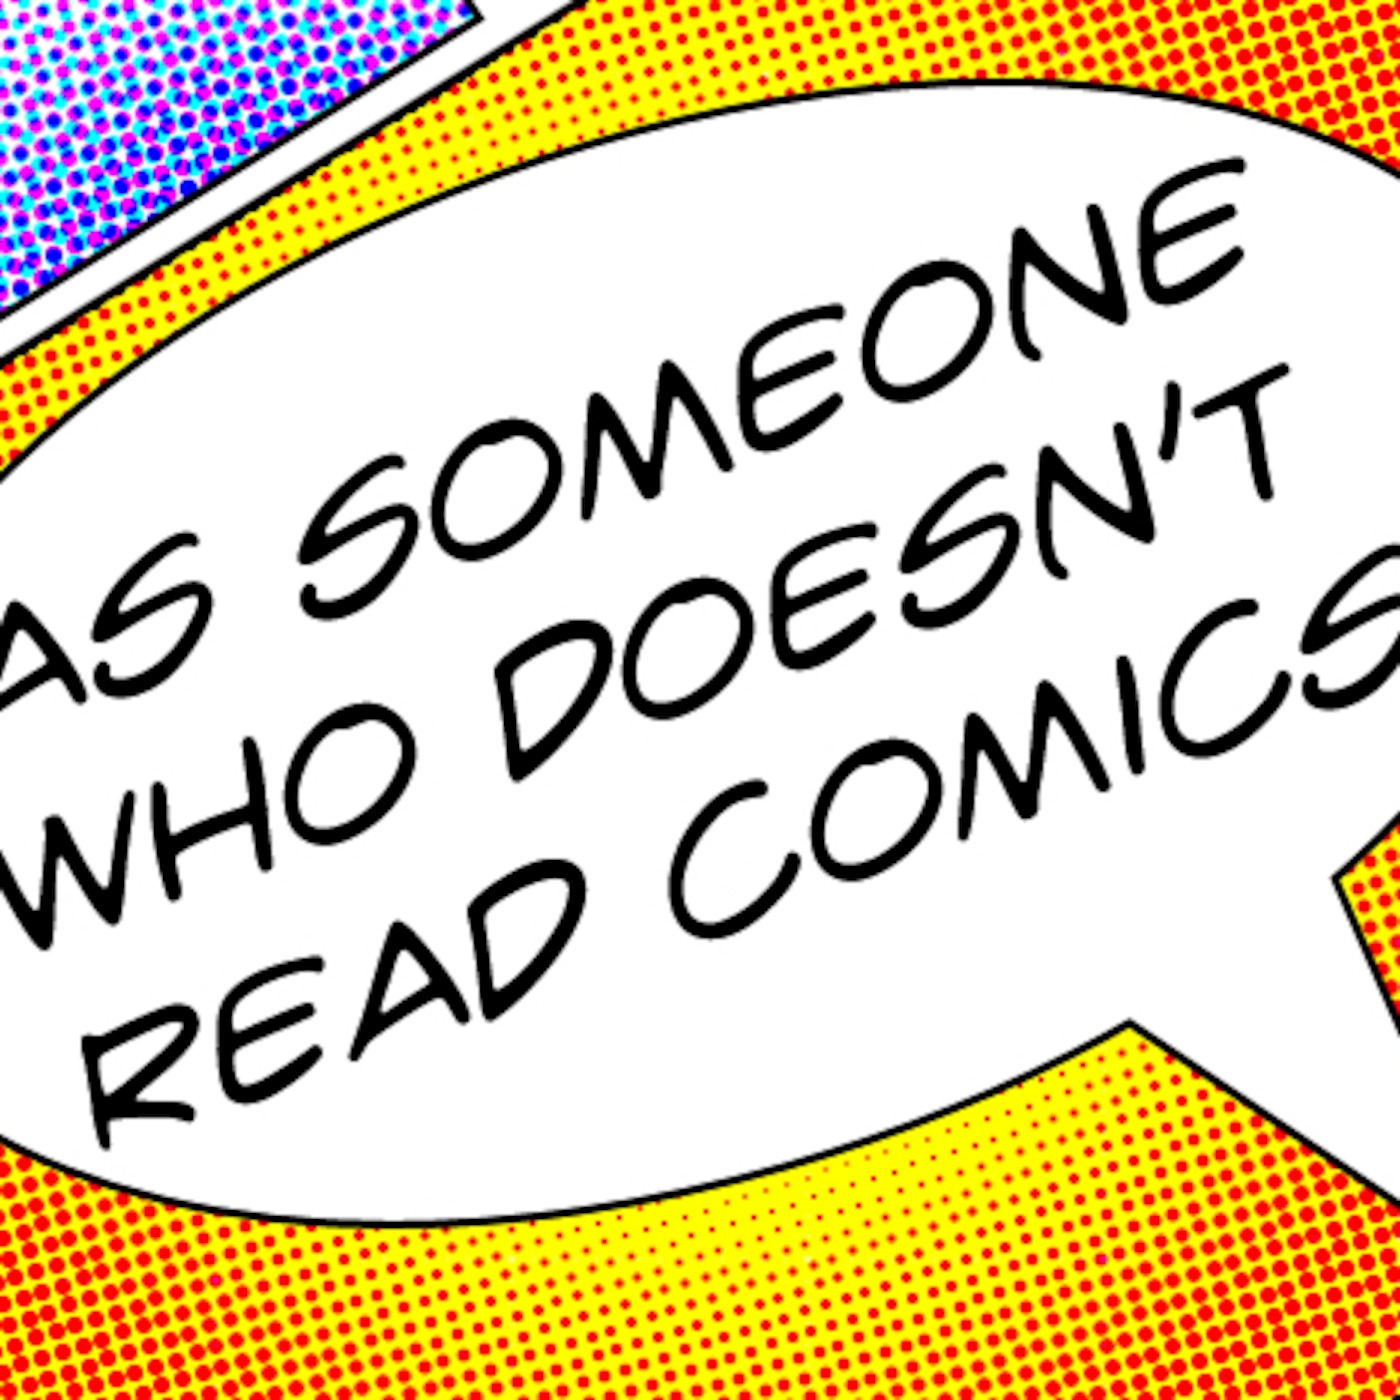 As Someone Who Doesn't Read Comics